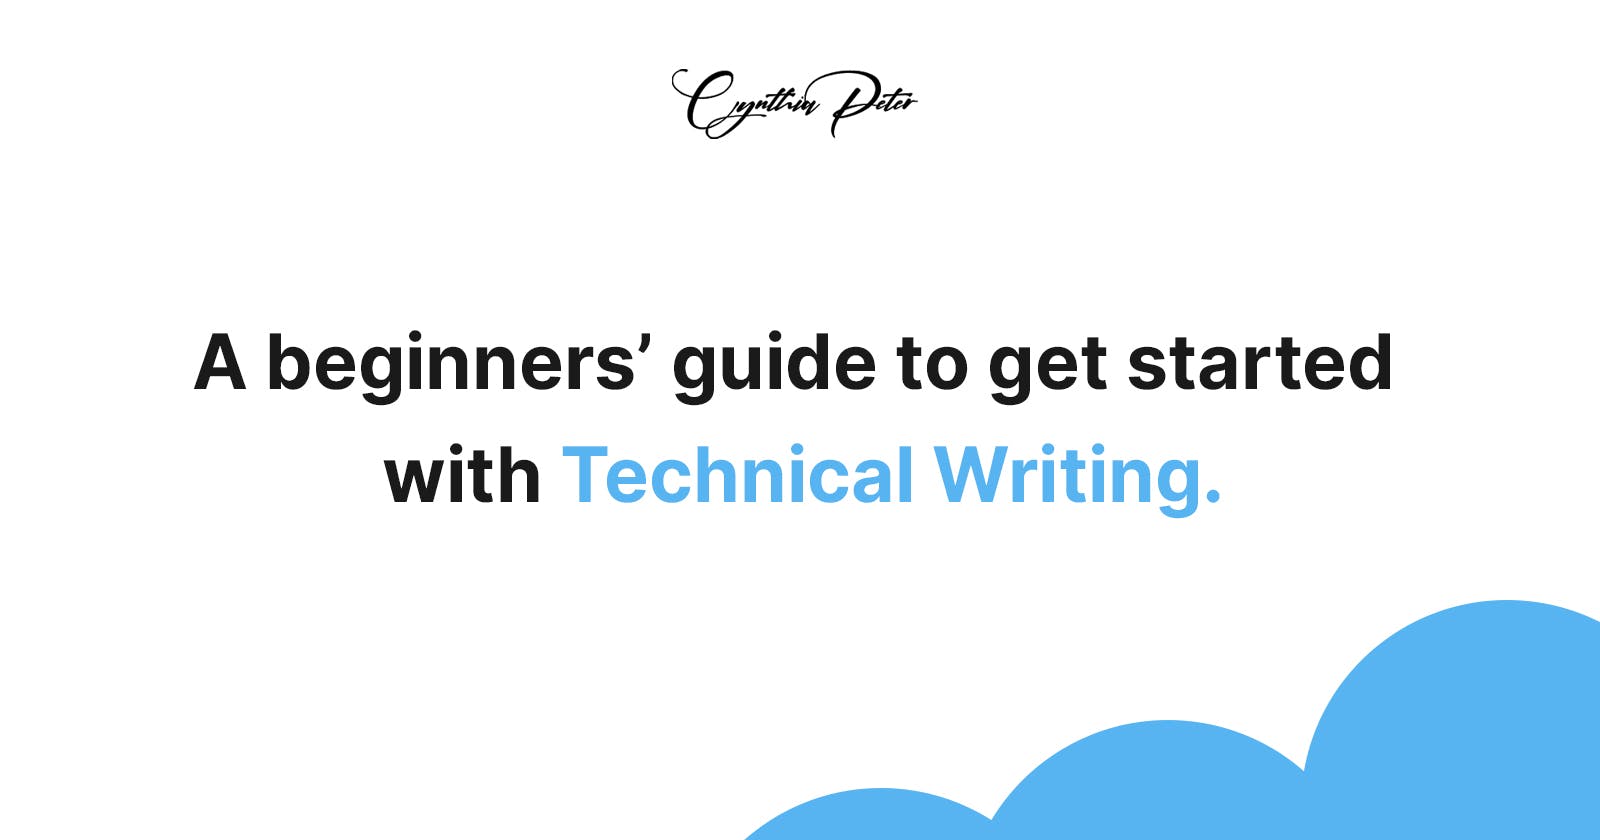 A beginners' guide to get started with Technical Writing